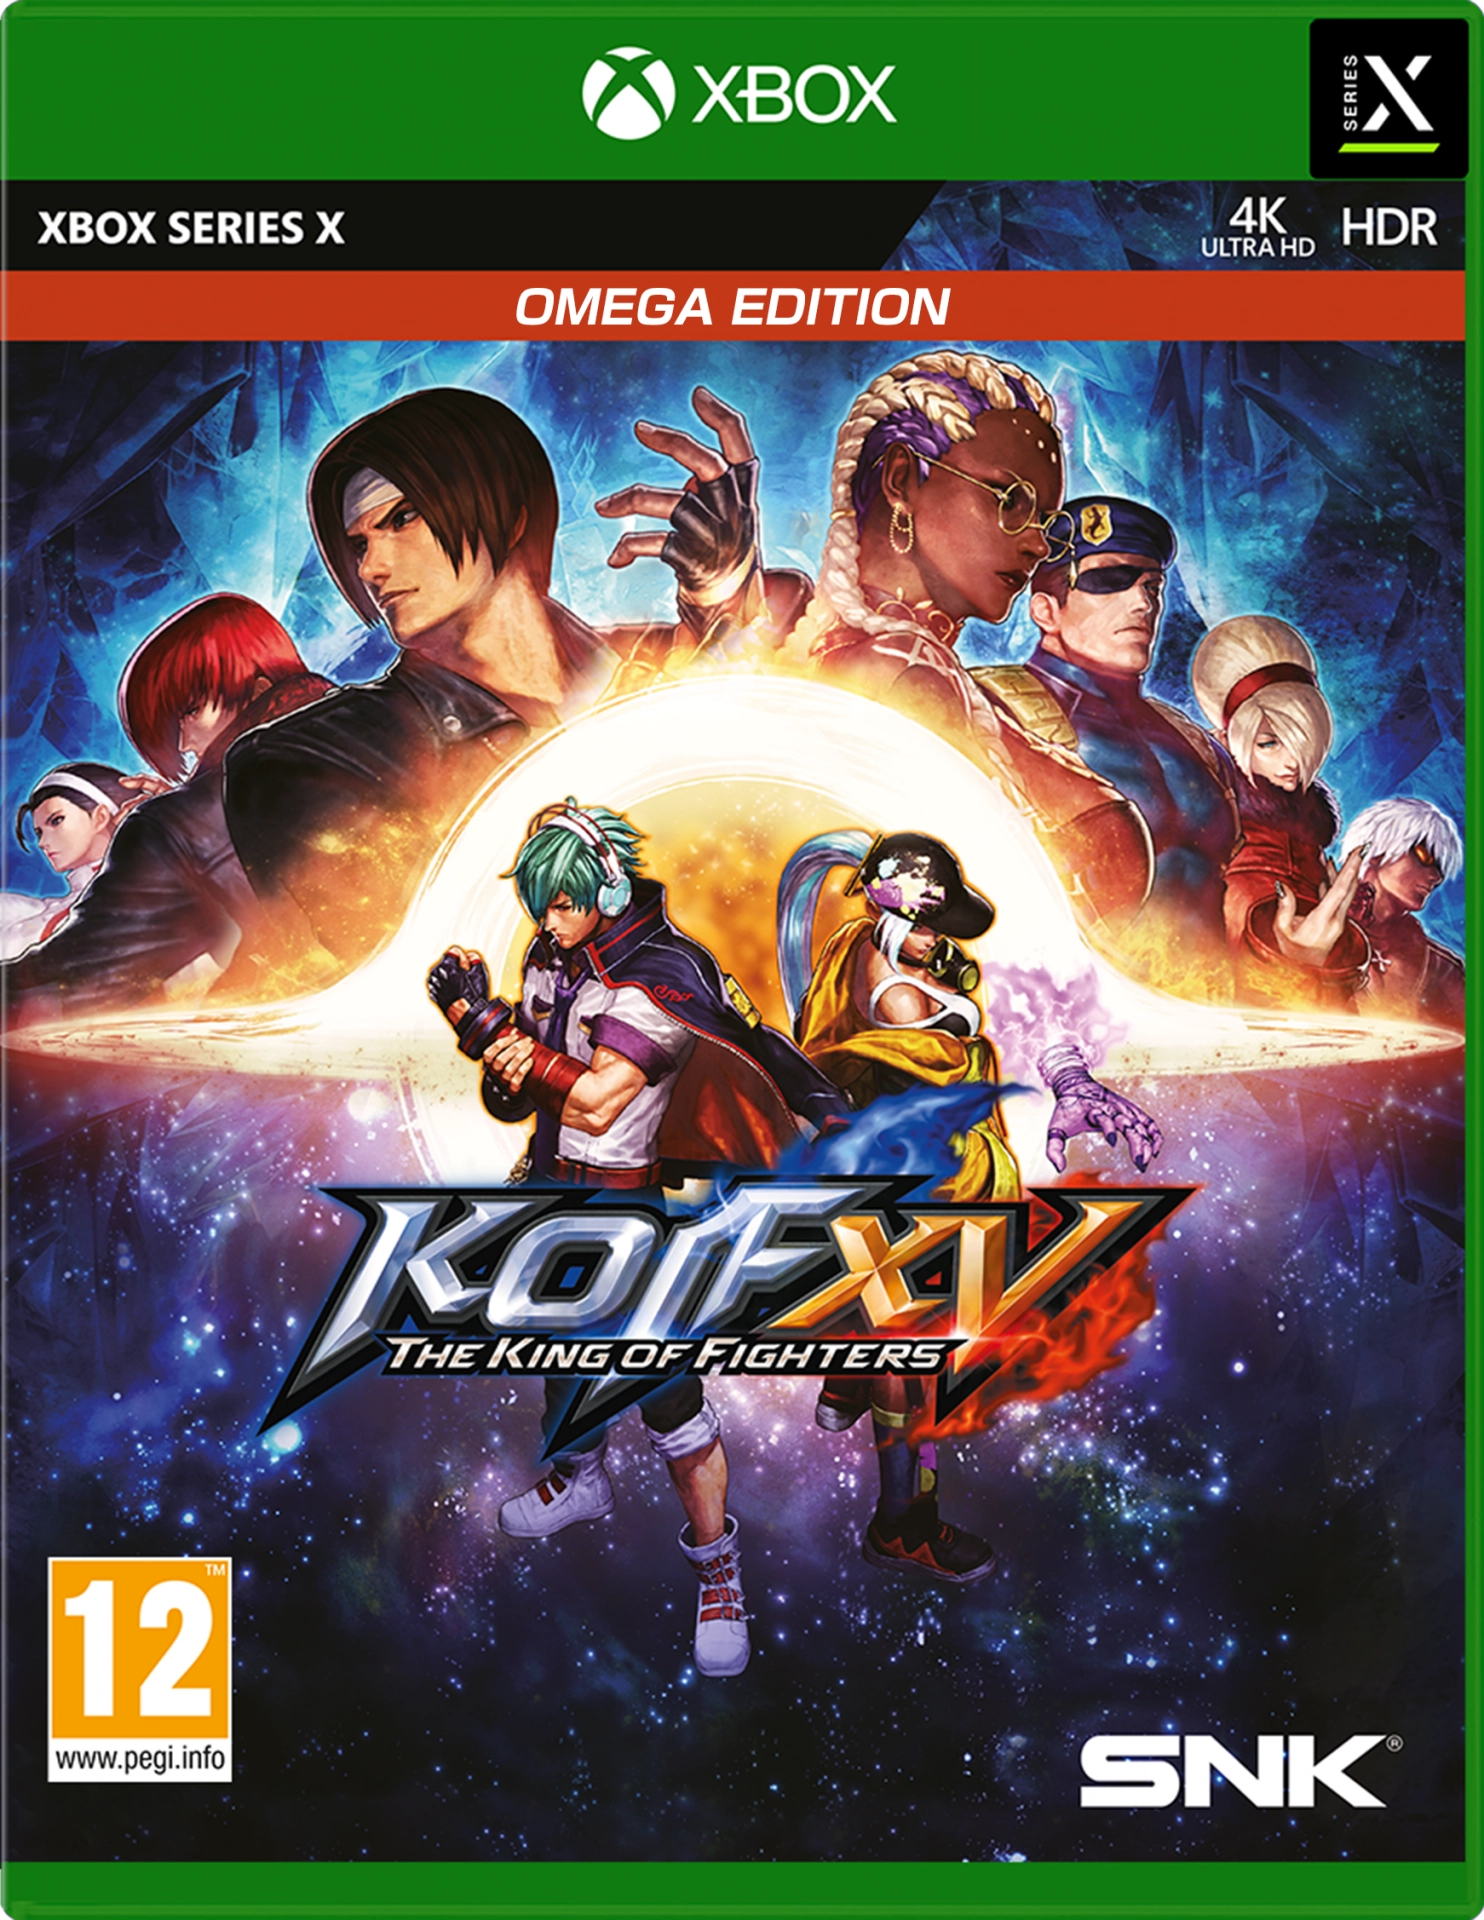 King of Fighters XV - Omega Edition (Xbox Series X), SNK